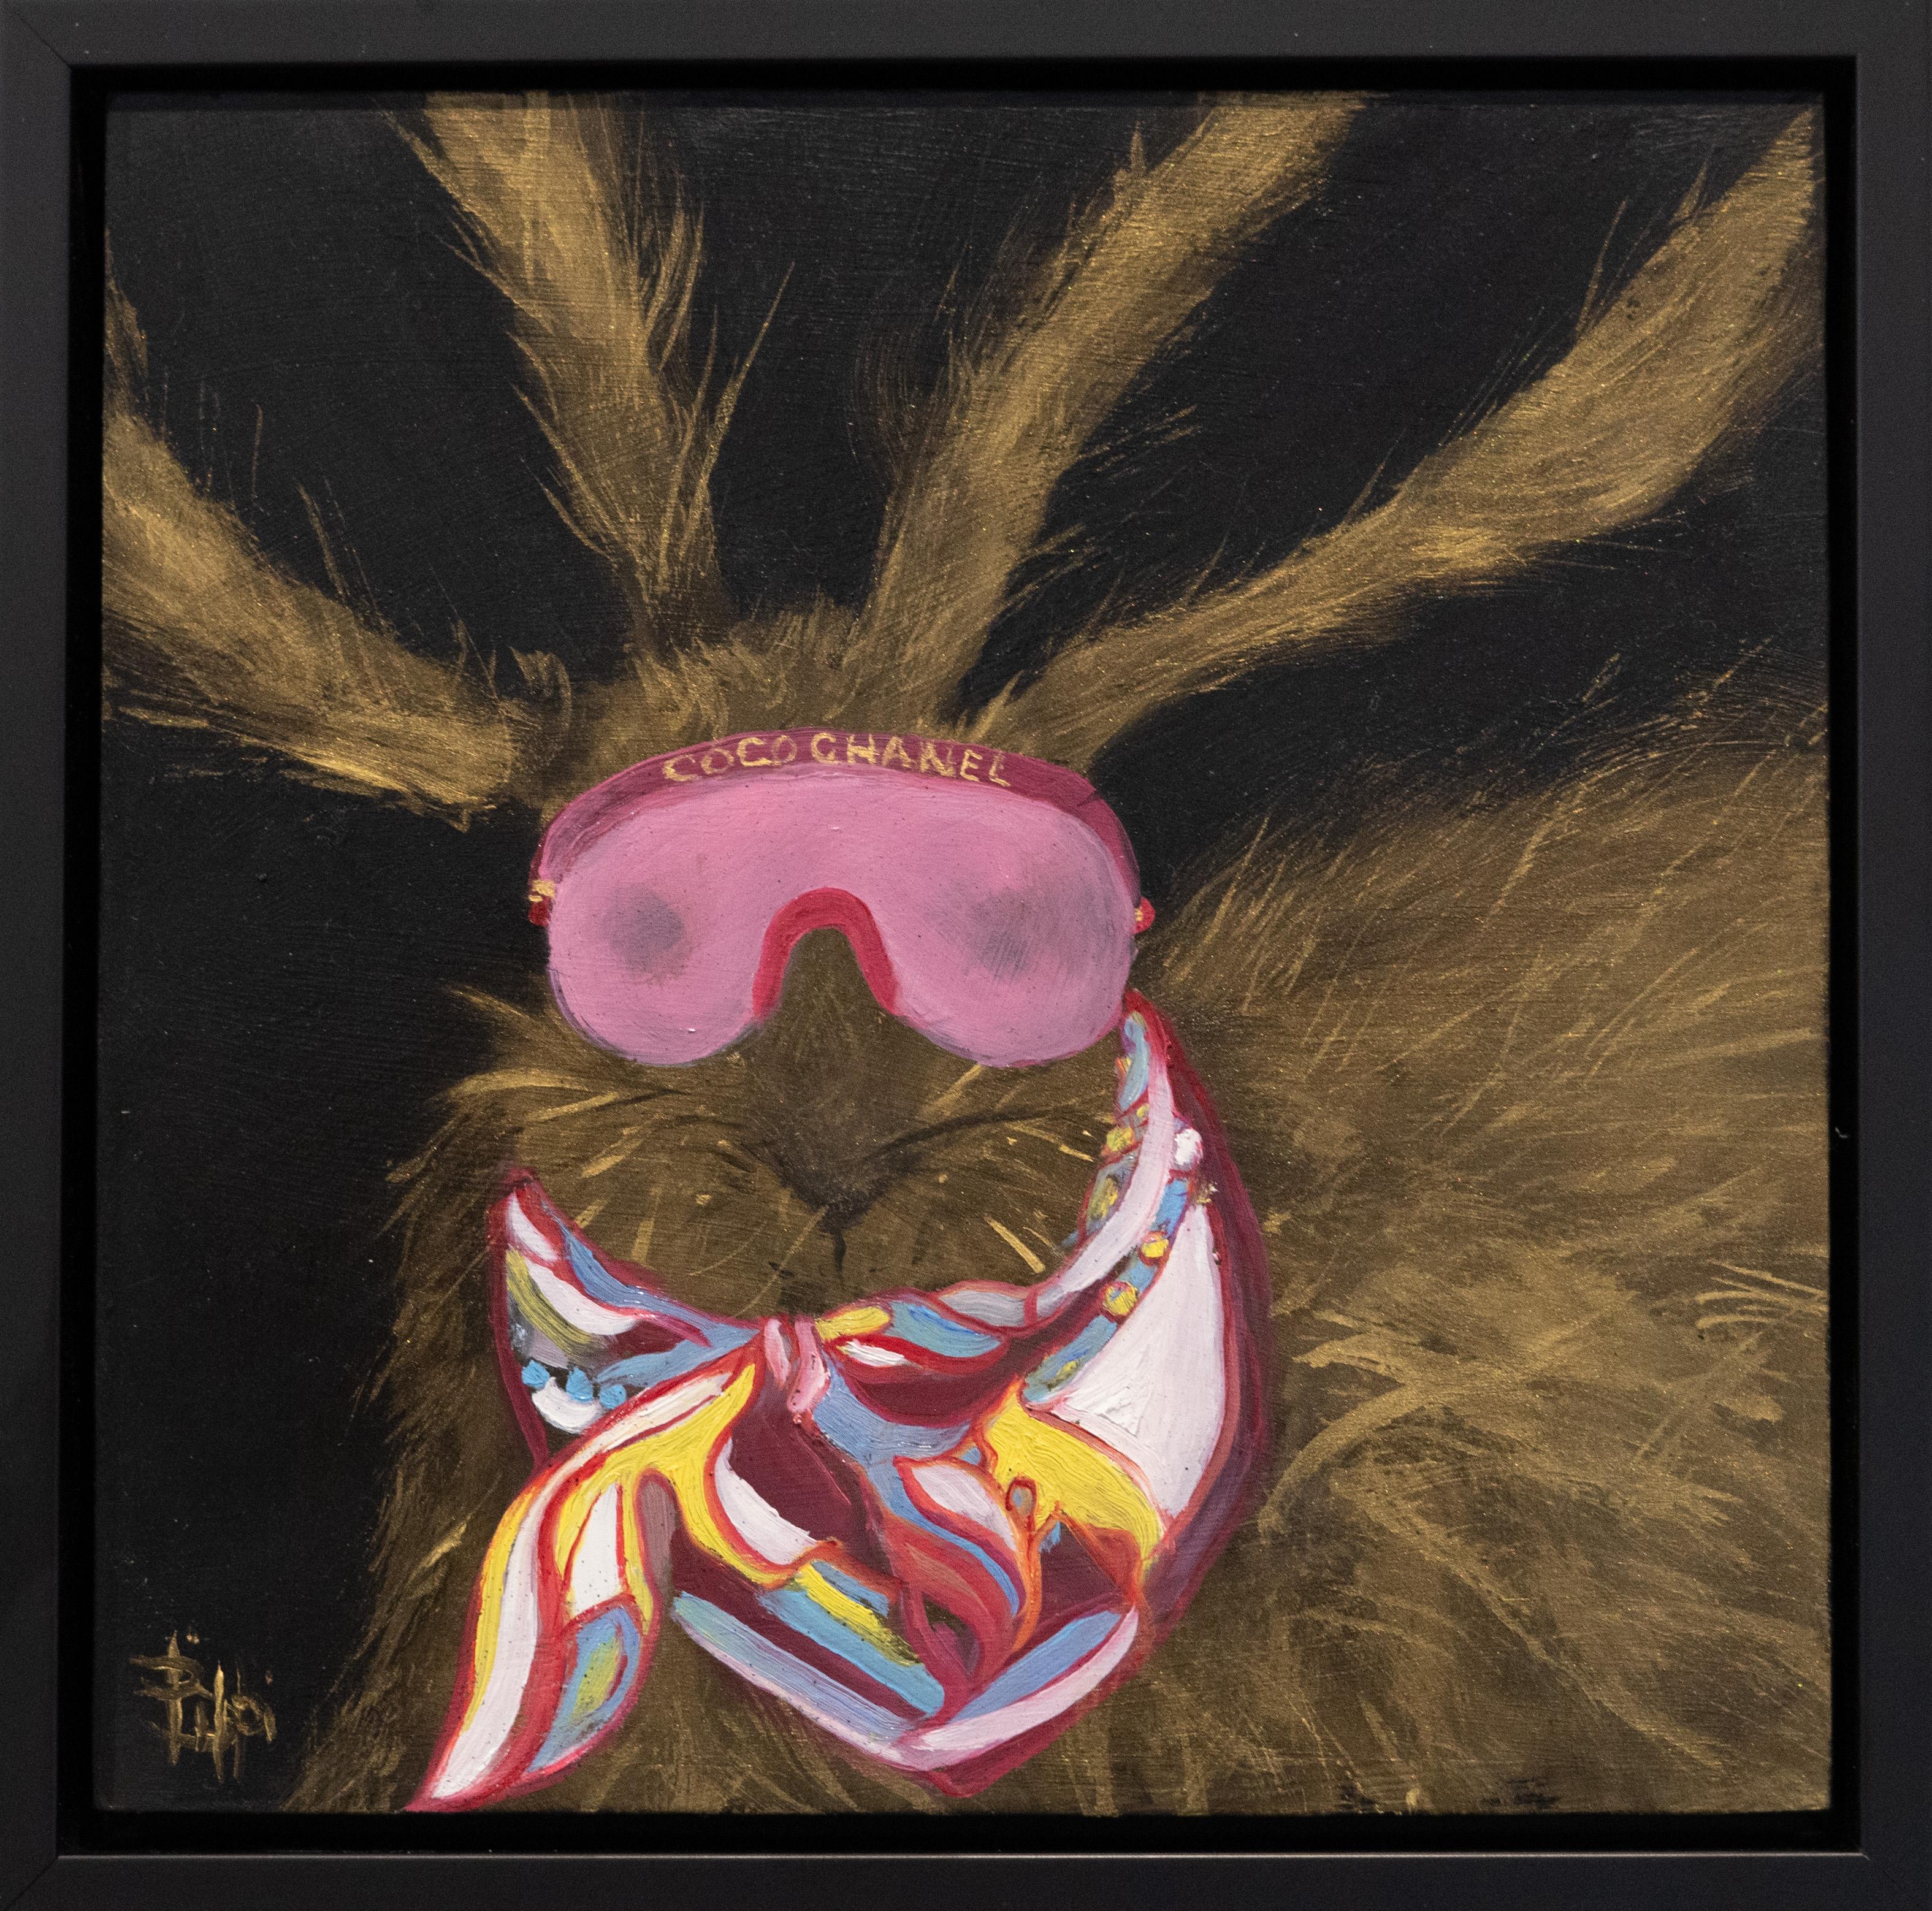 Golden Hare with Louis Vuitton Sunglasses  10x10  Contemporary Art  Framed  3